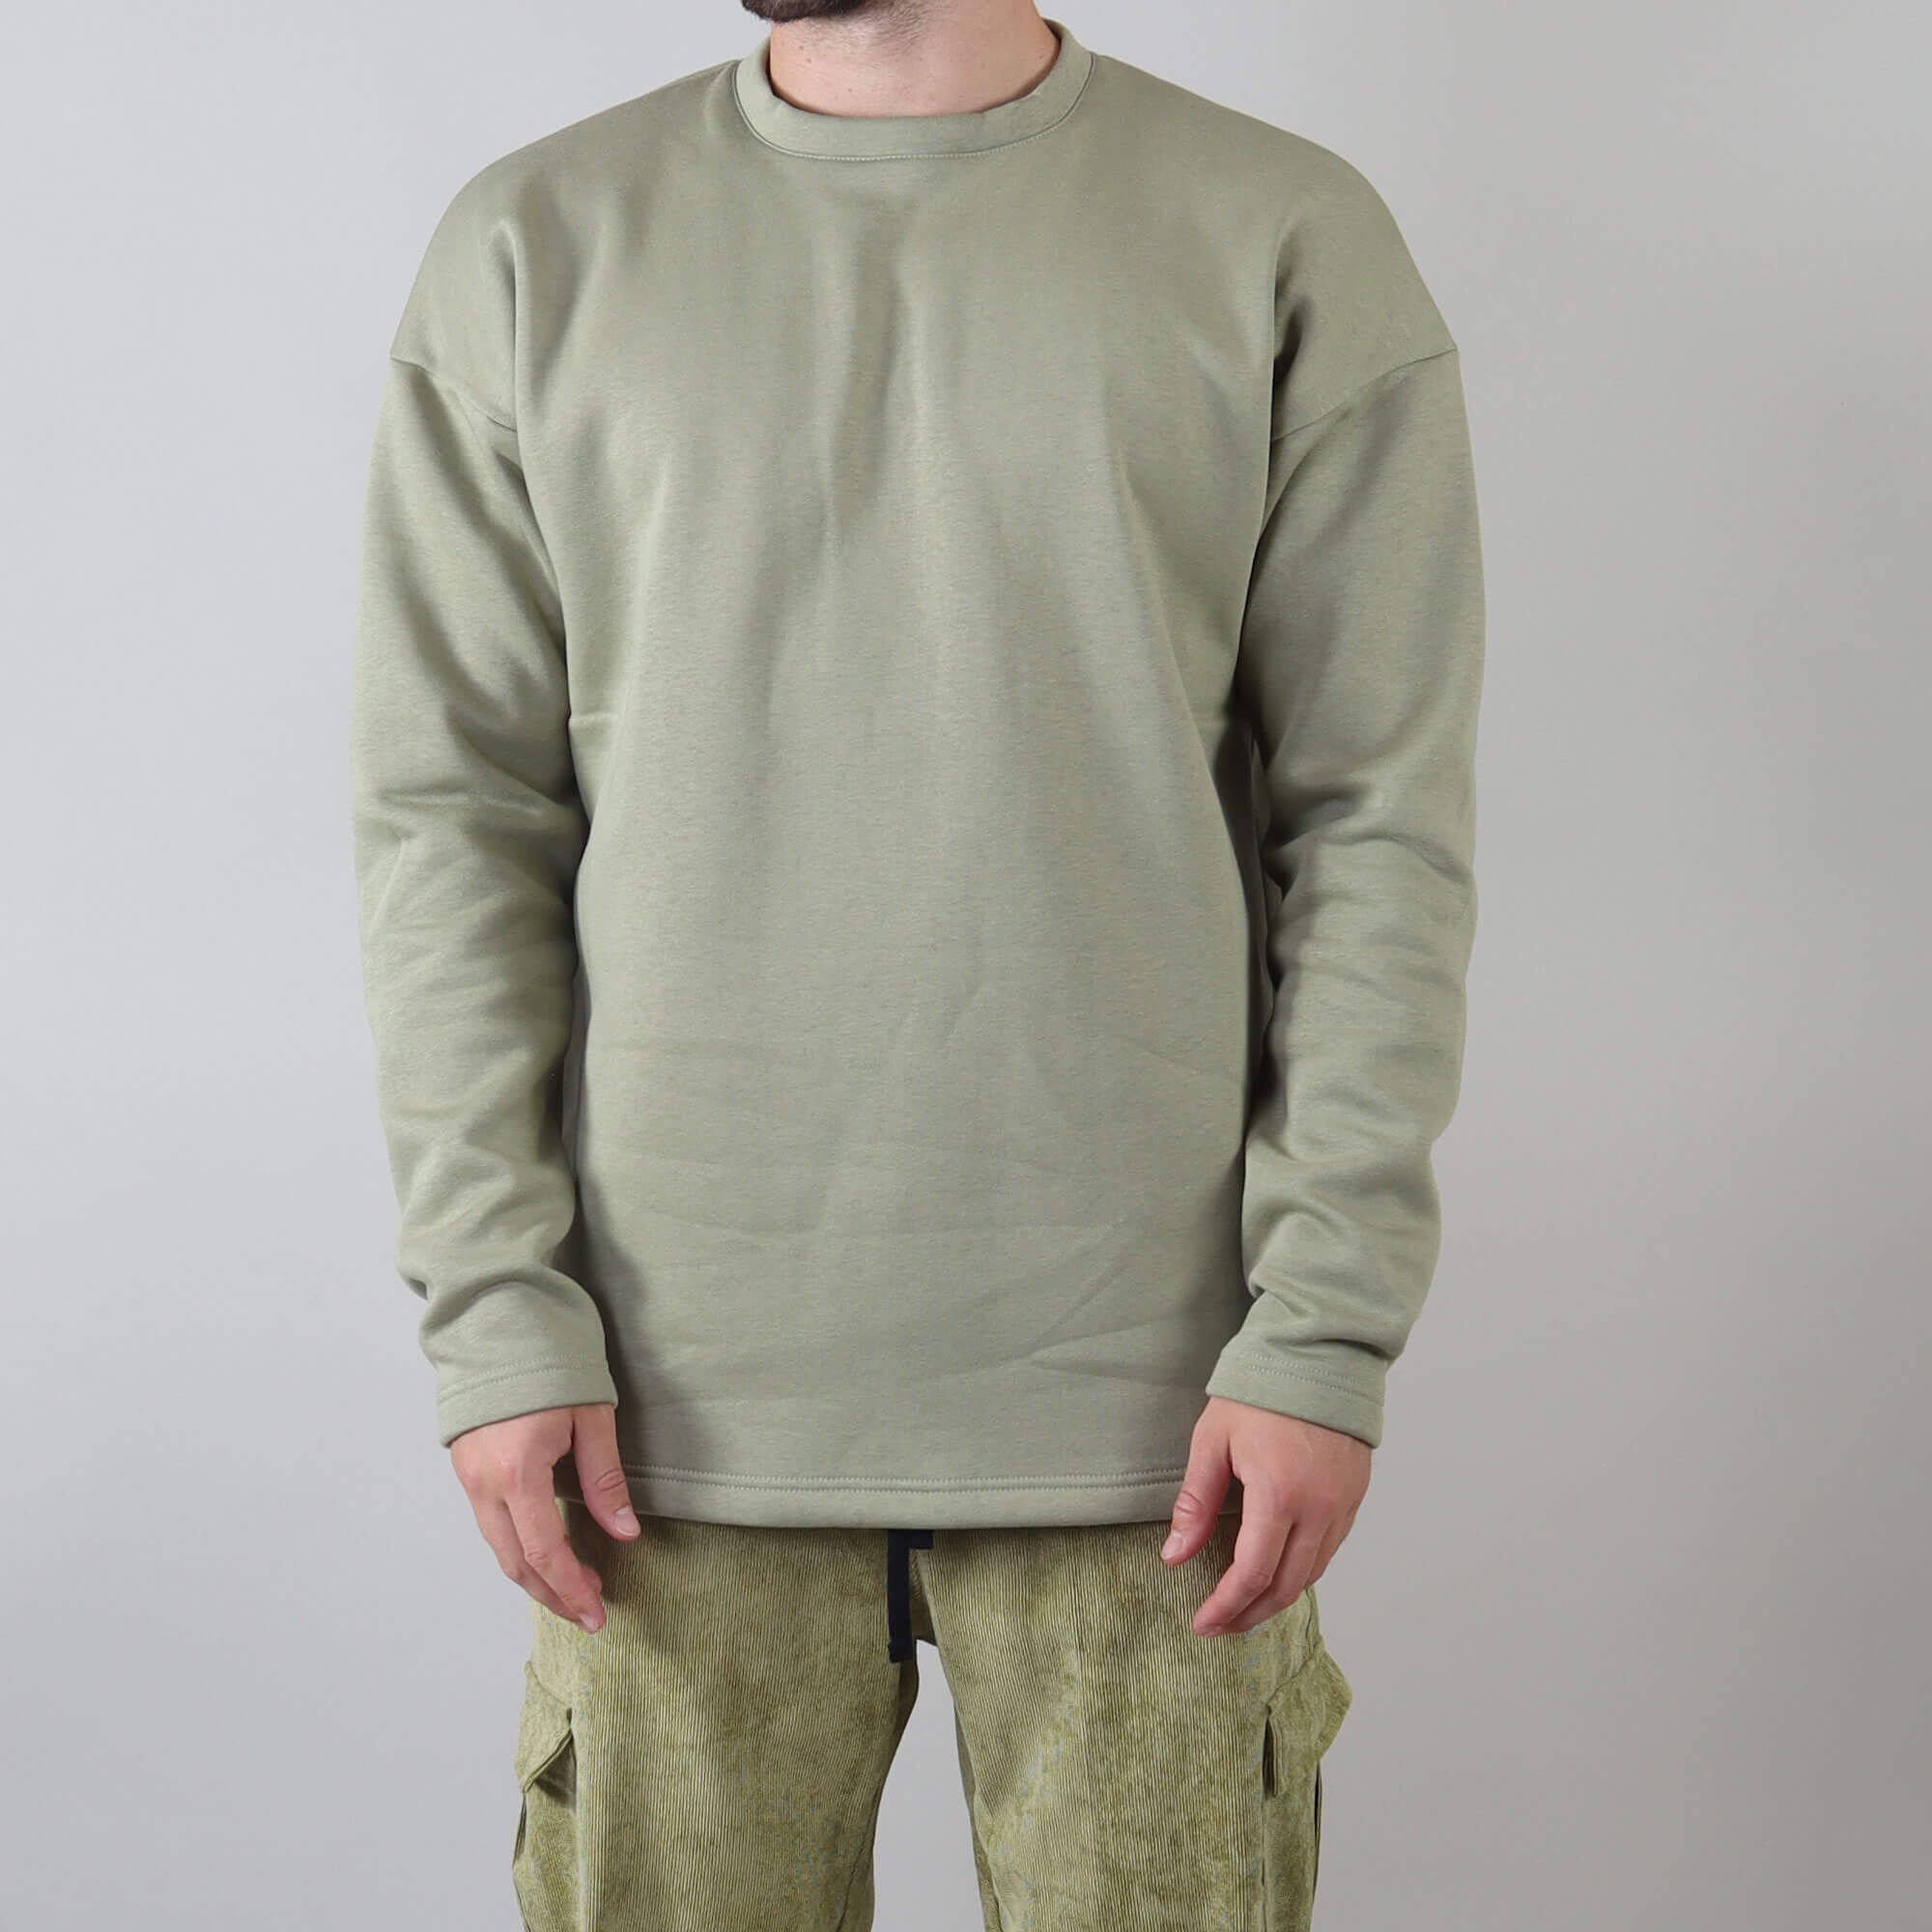 PRJCT sweater sage / SOLD OUT